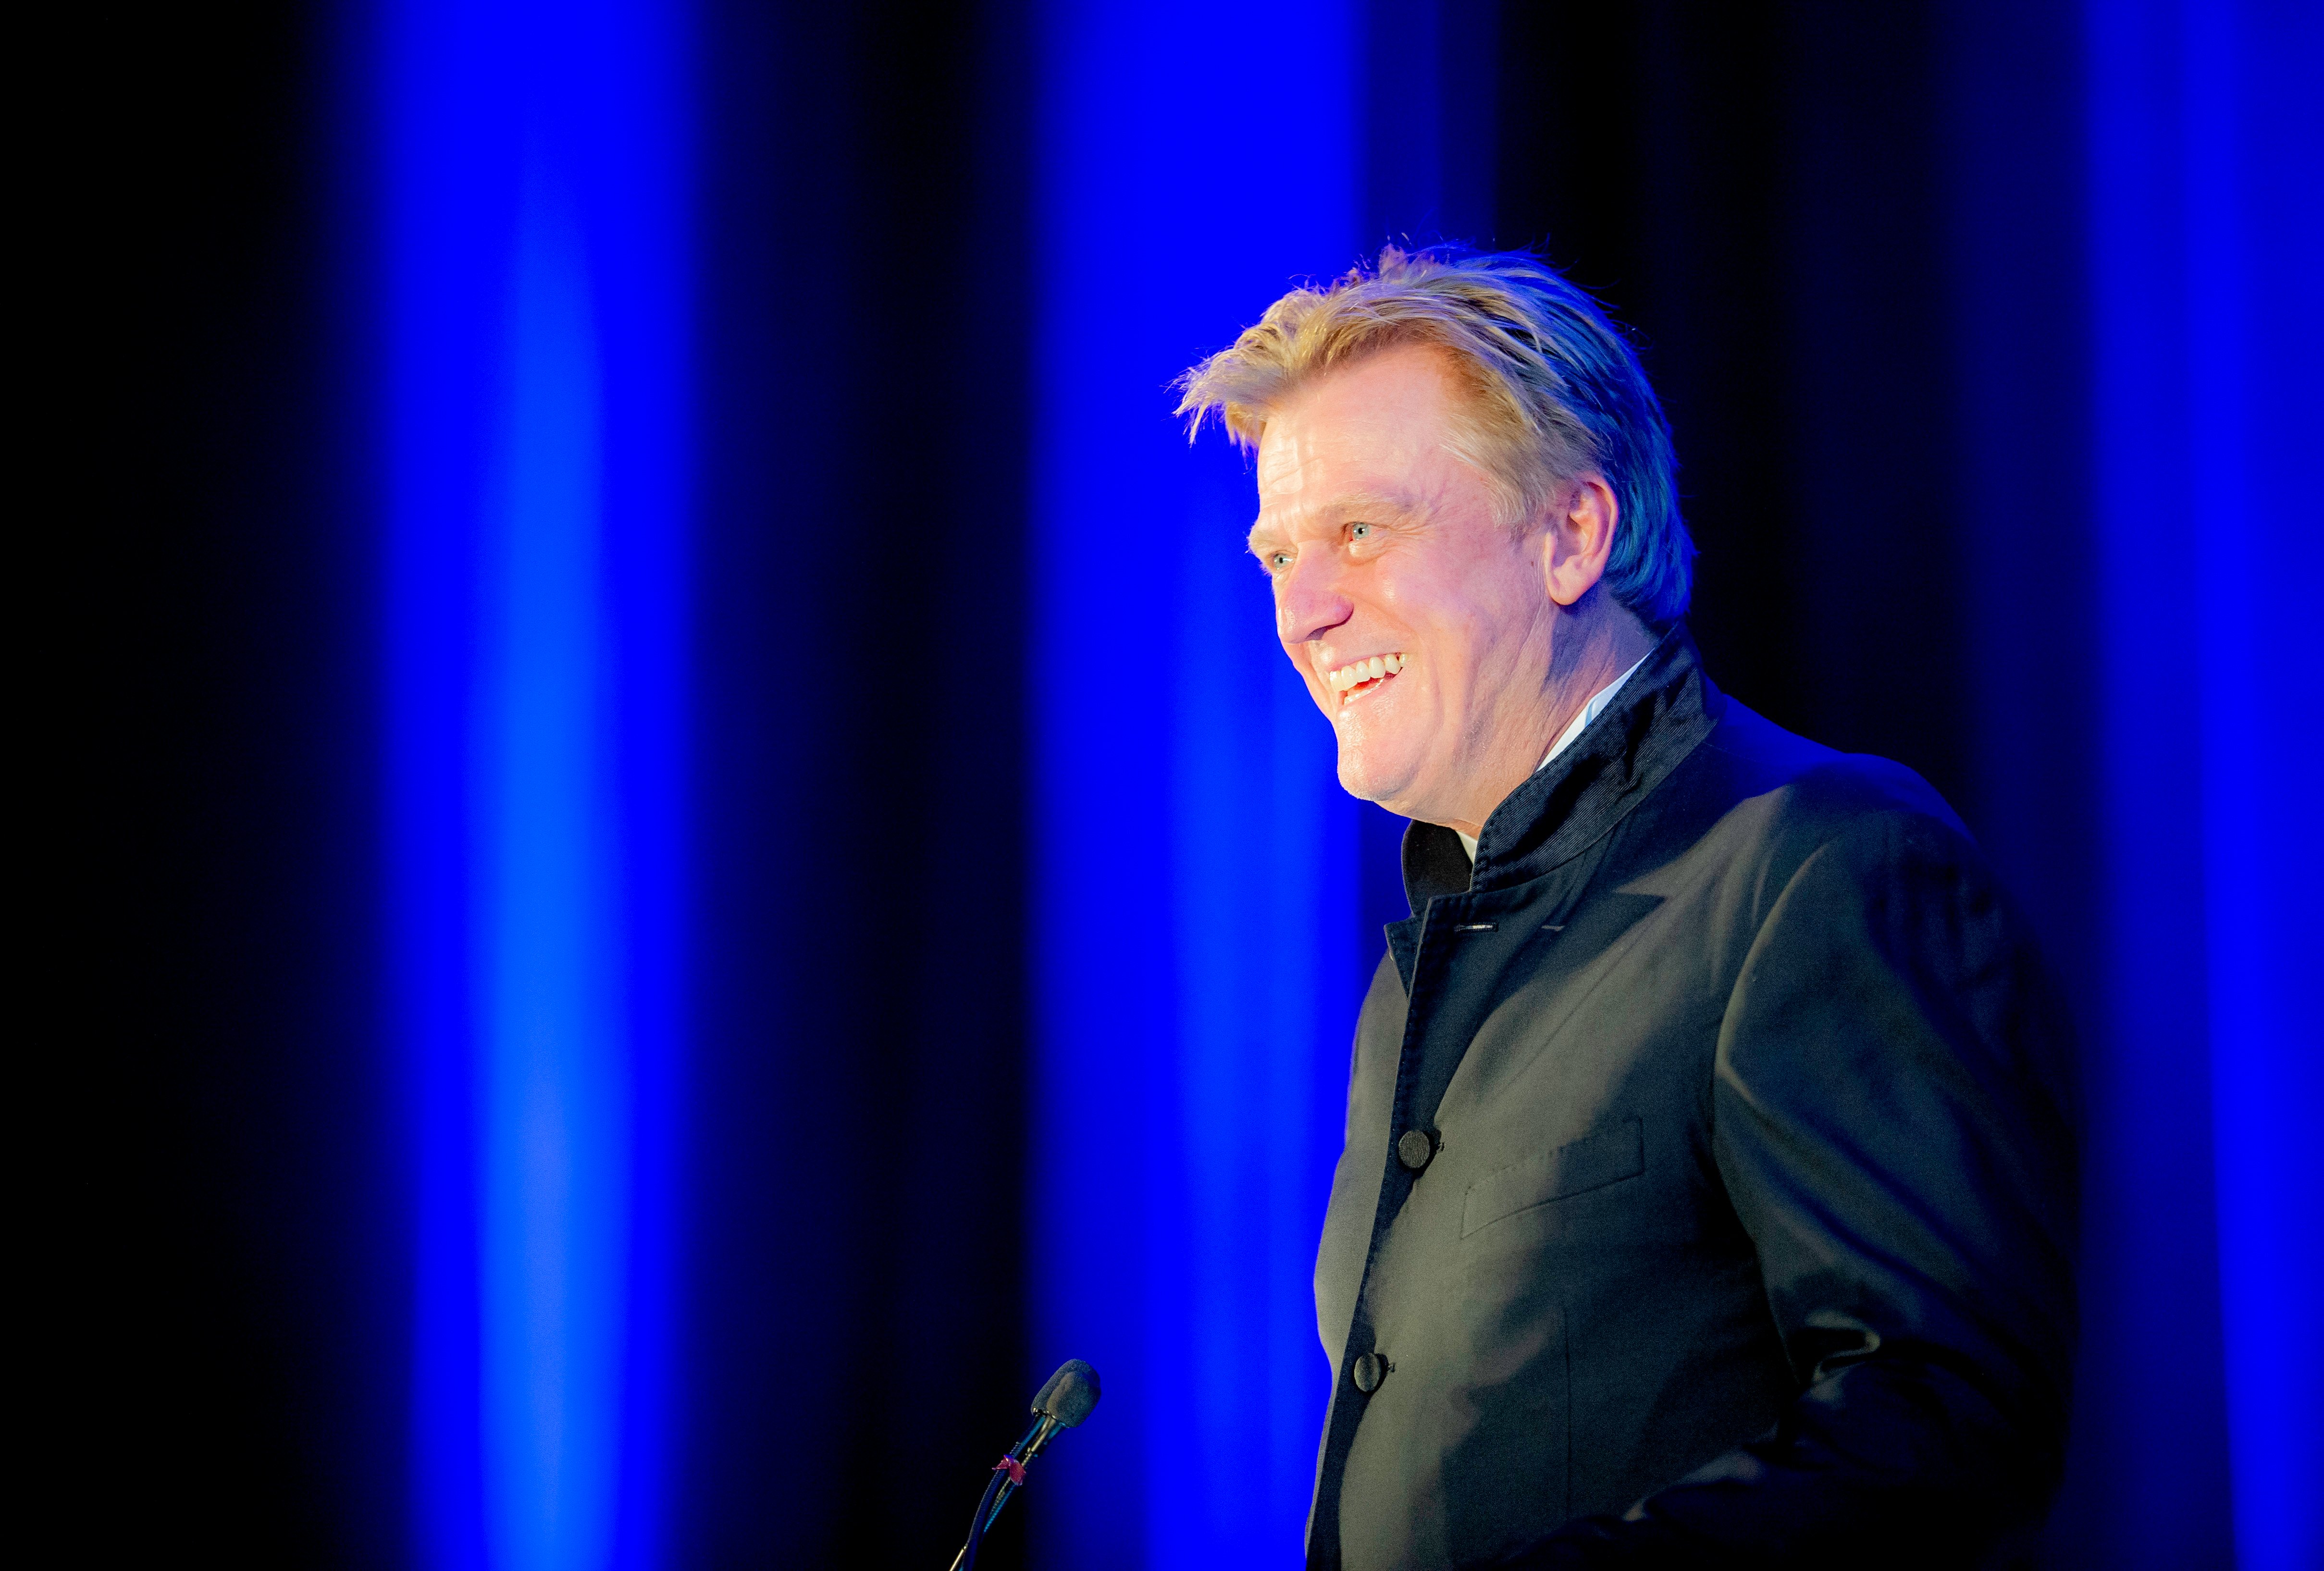 PMC Increases Goal to $60 Million with $1 Million Challenge from Patrick Byrne